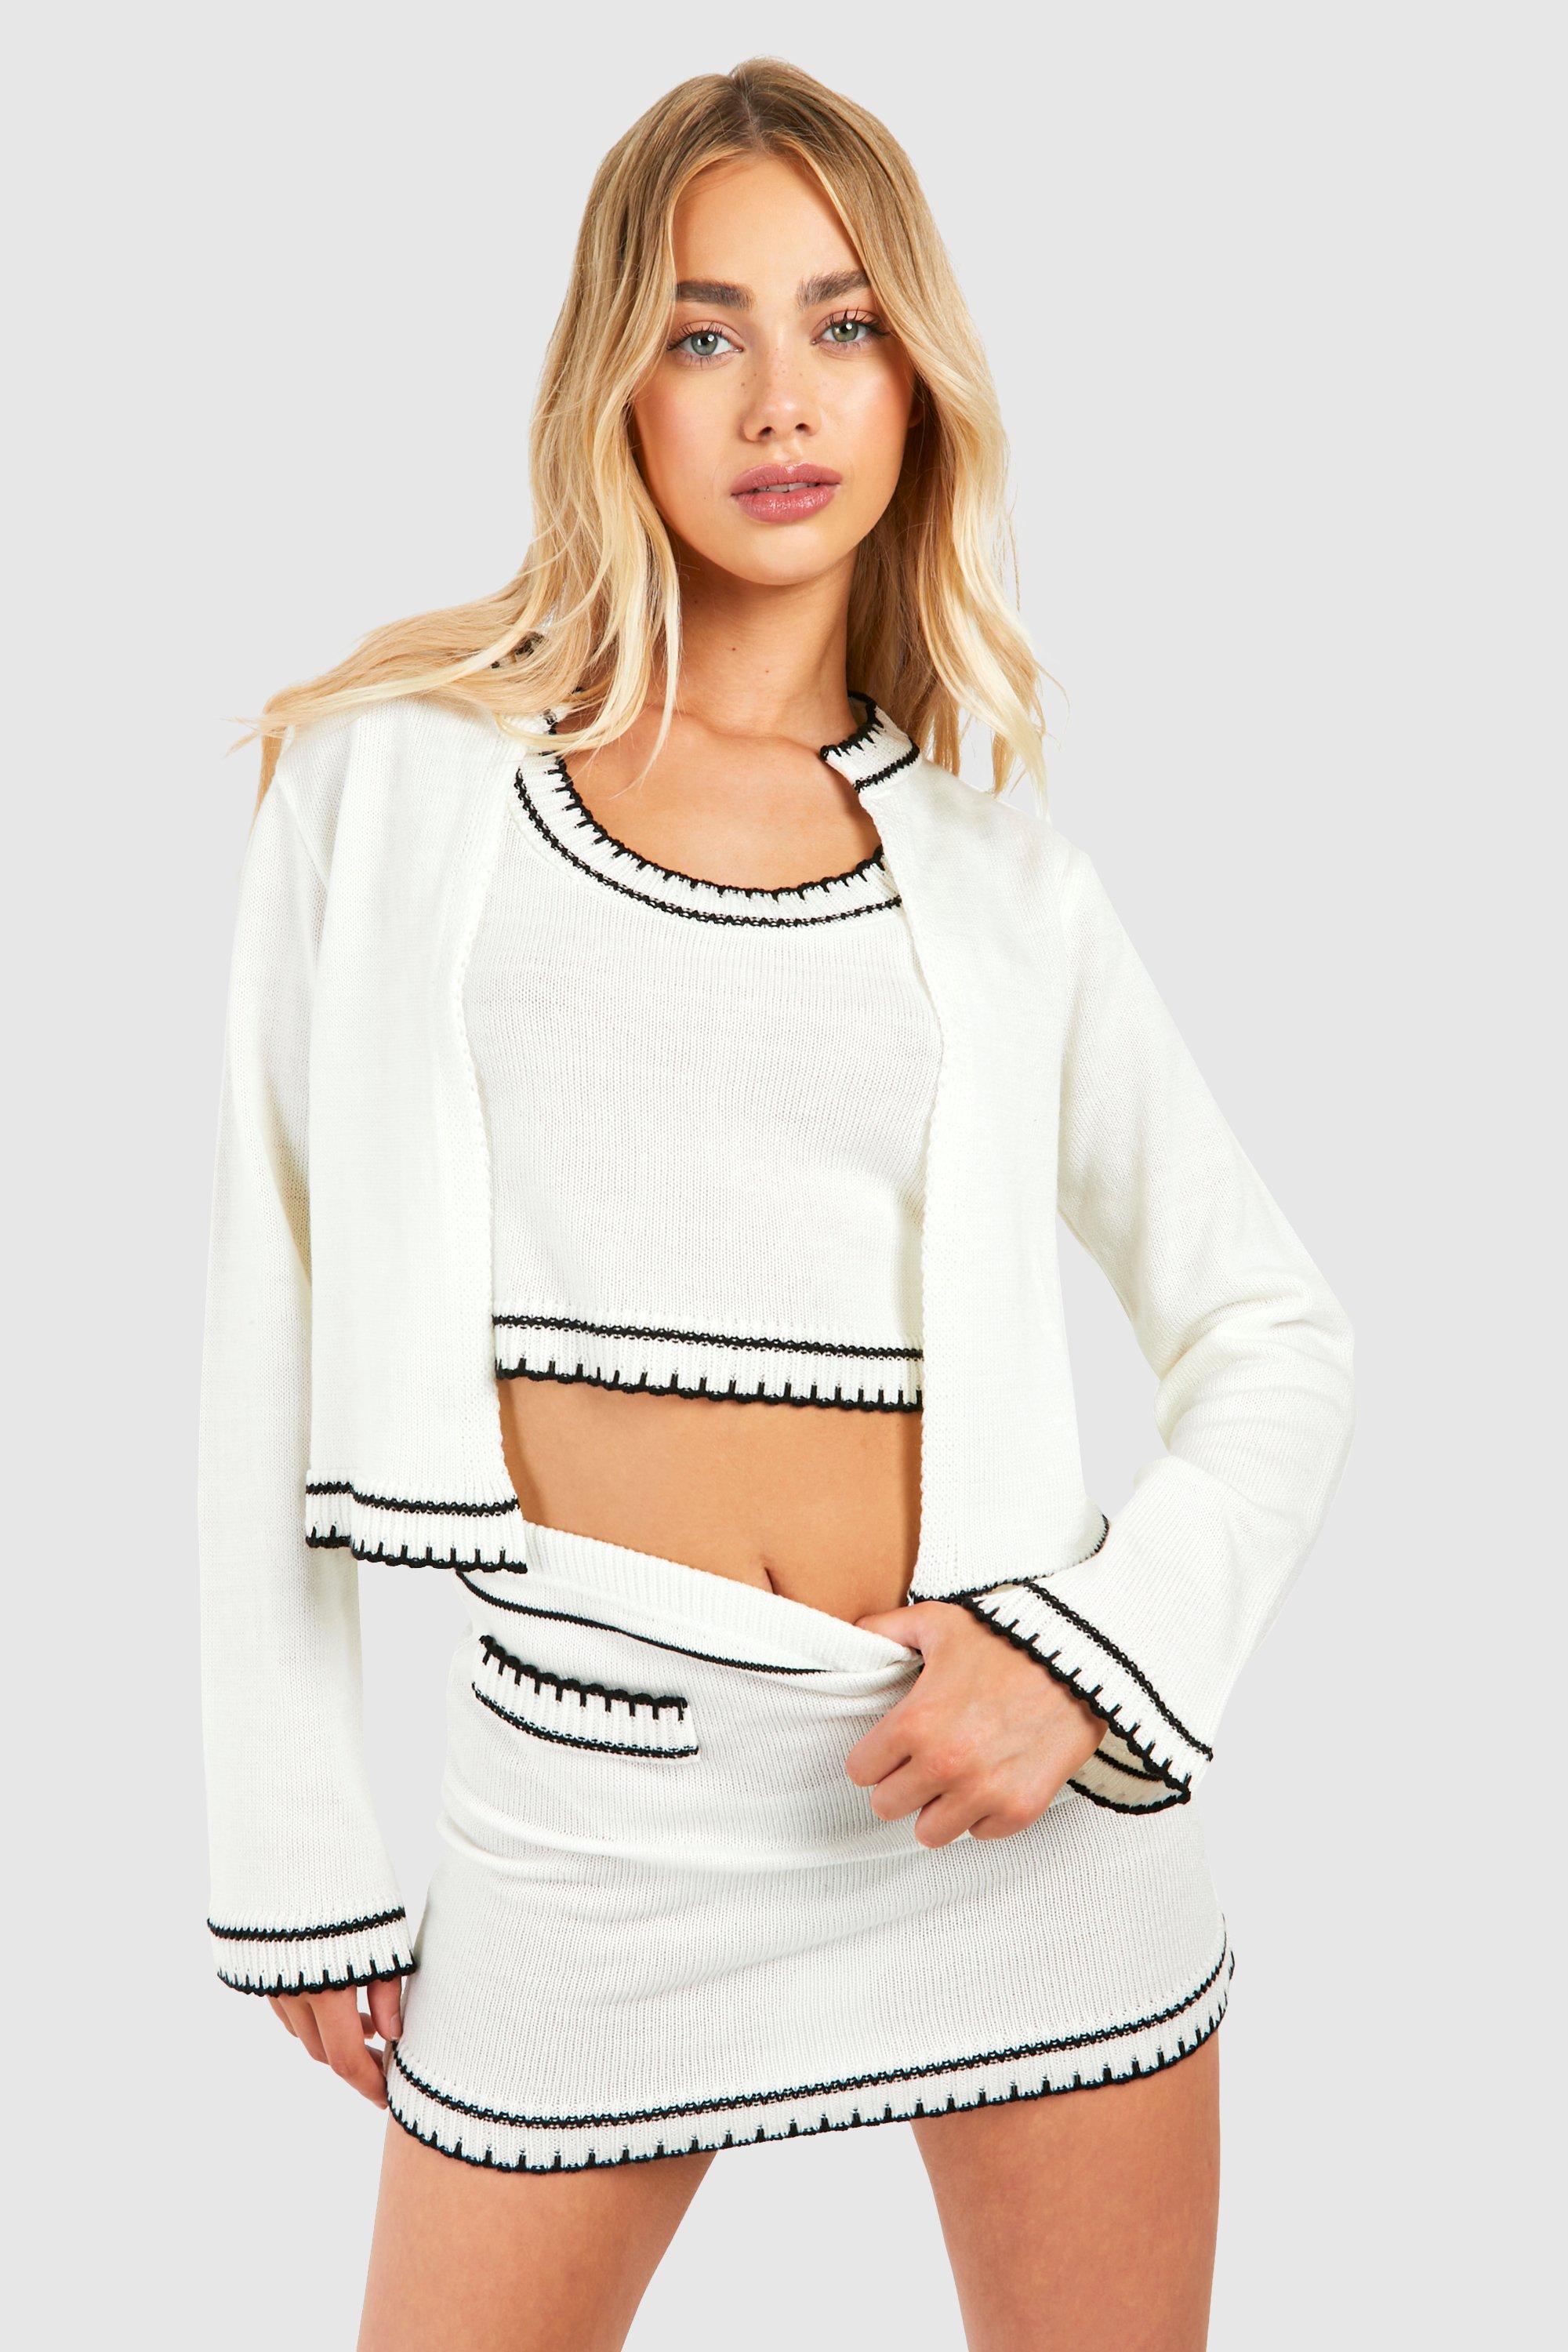 Contrast Stitch 3 Piece Knitted Cardigan, Crop Top And Mini 